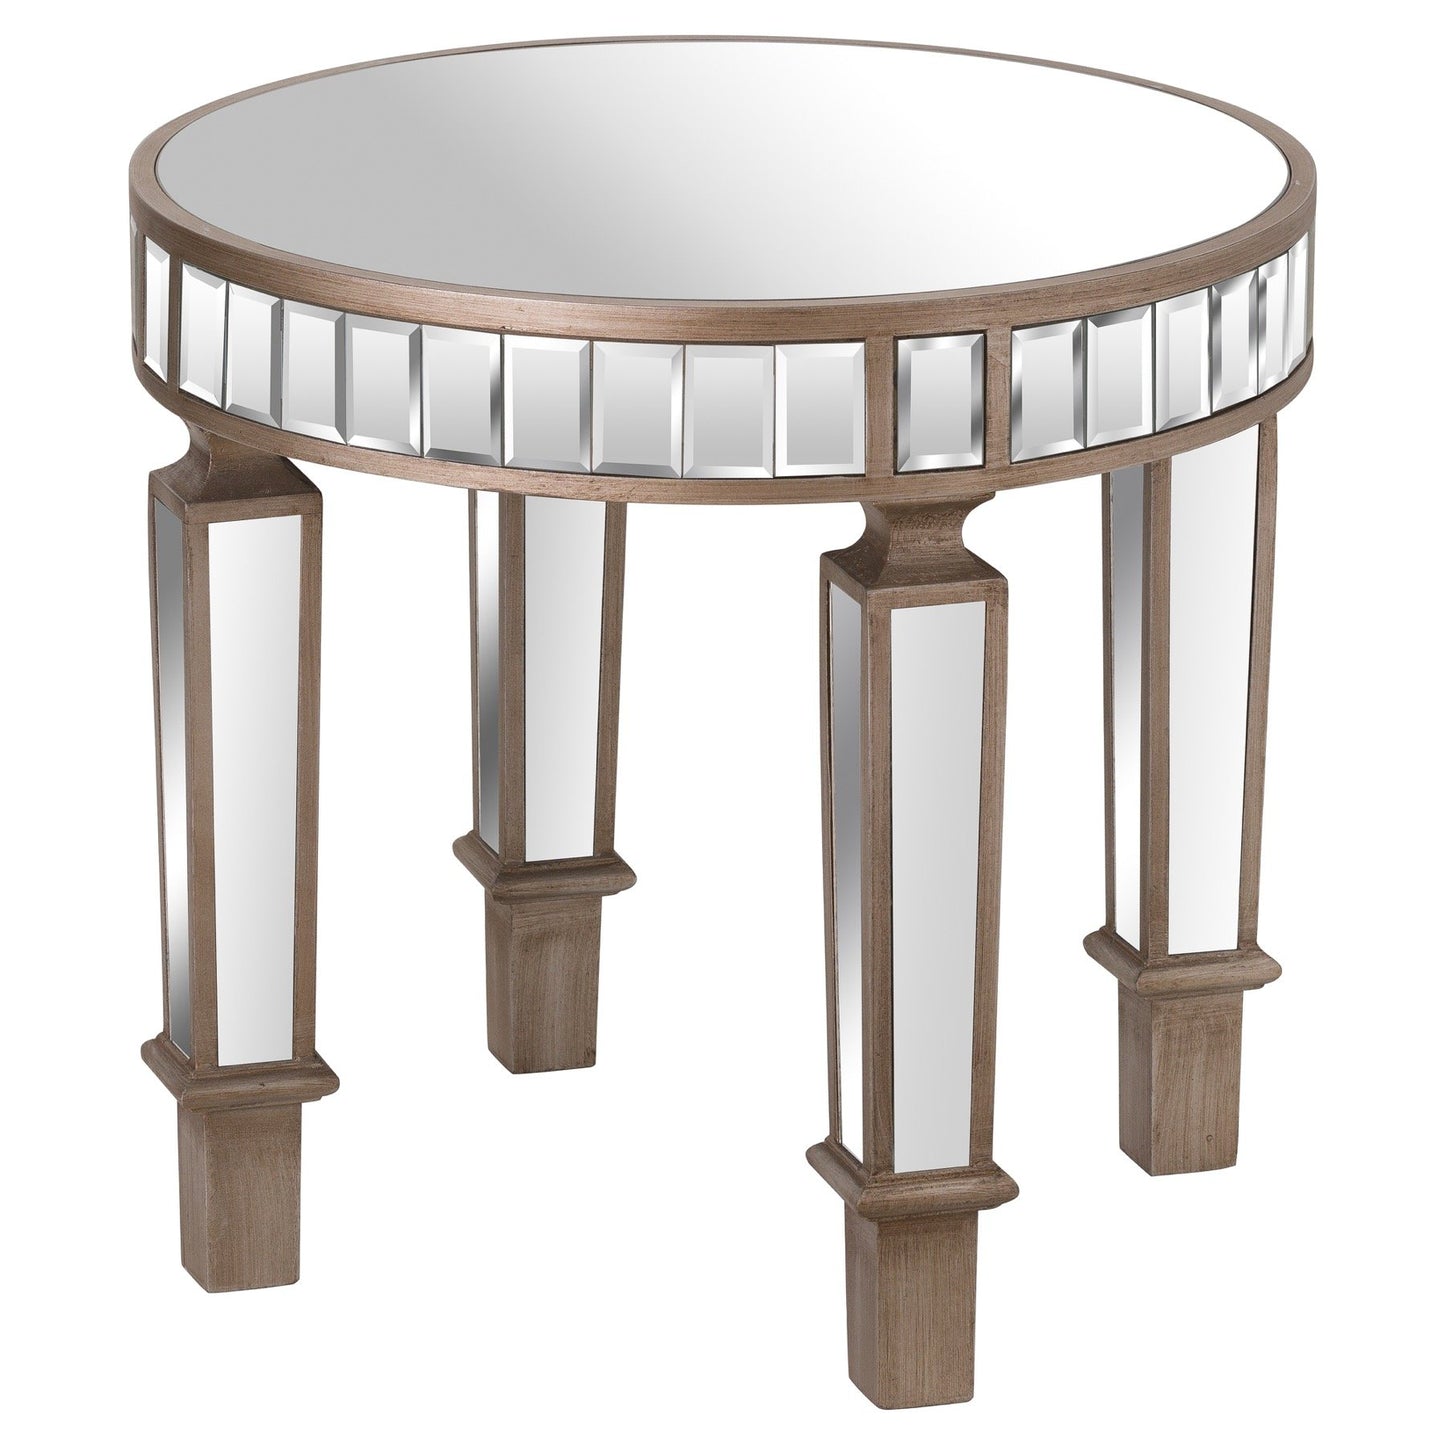 The Belfry Collection Mirrored Round Side Table